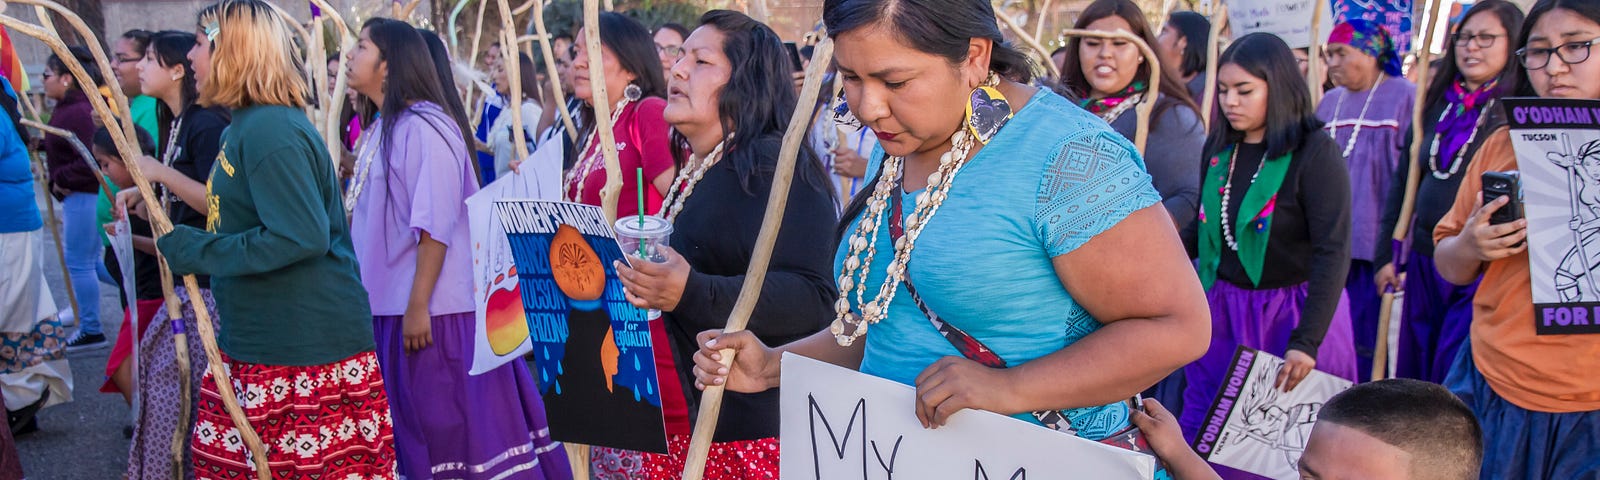 Native American women and children marching in a protest.